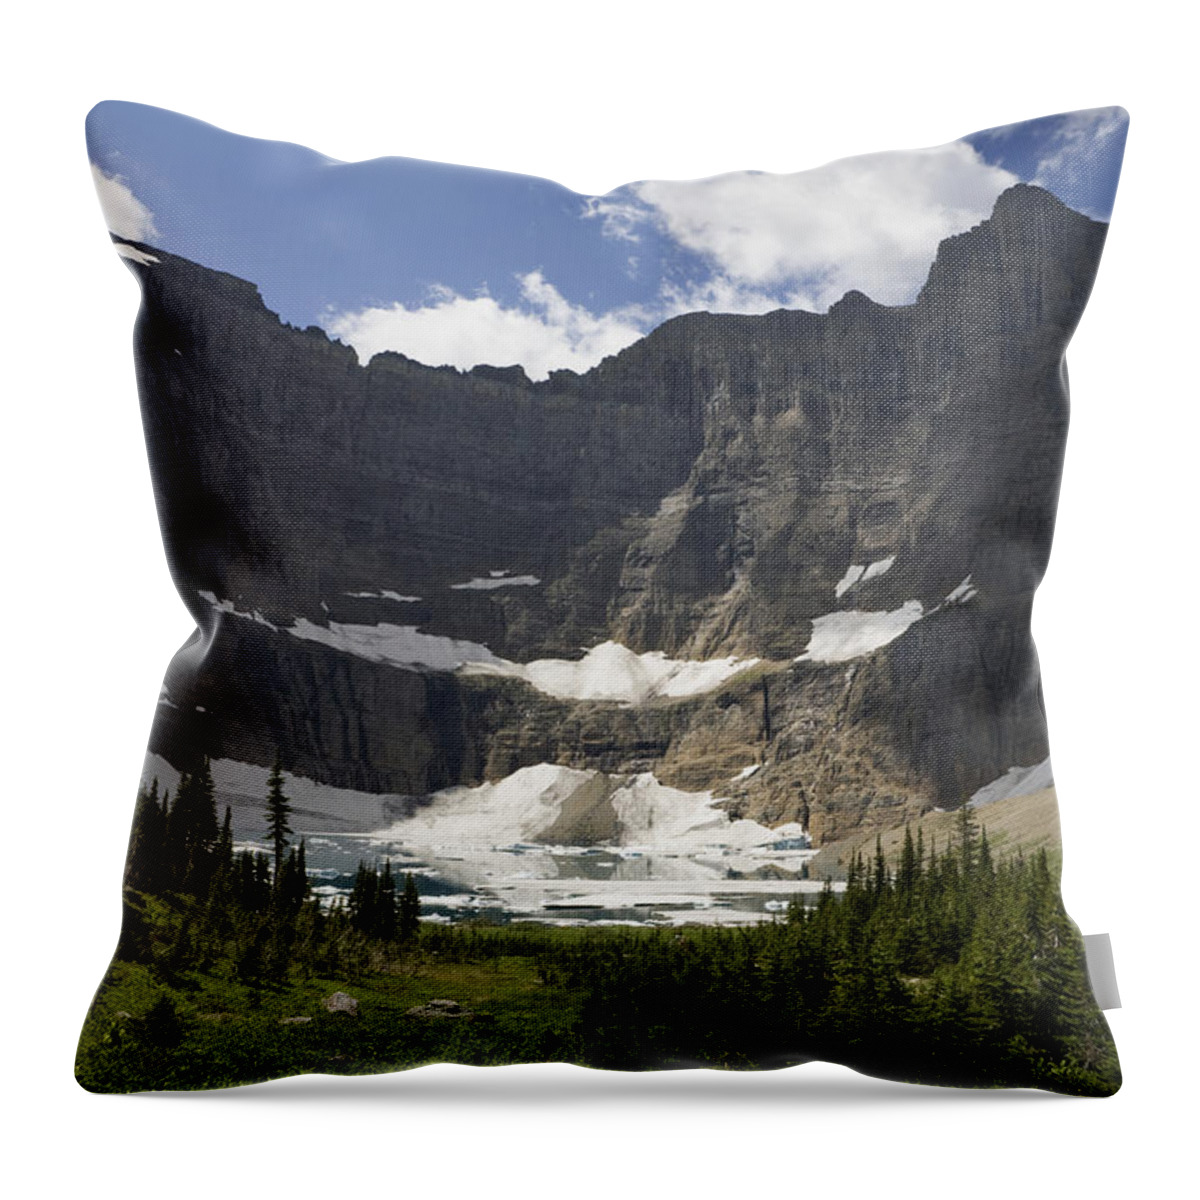 00439320 Throw Pillow featuring the photograph Iceberg Lake And Melting Many Glacier by Sebastian Kennerknecht